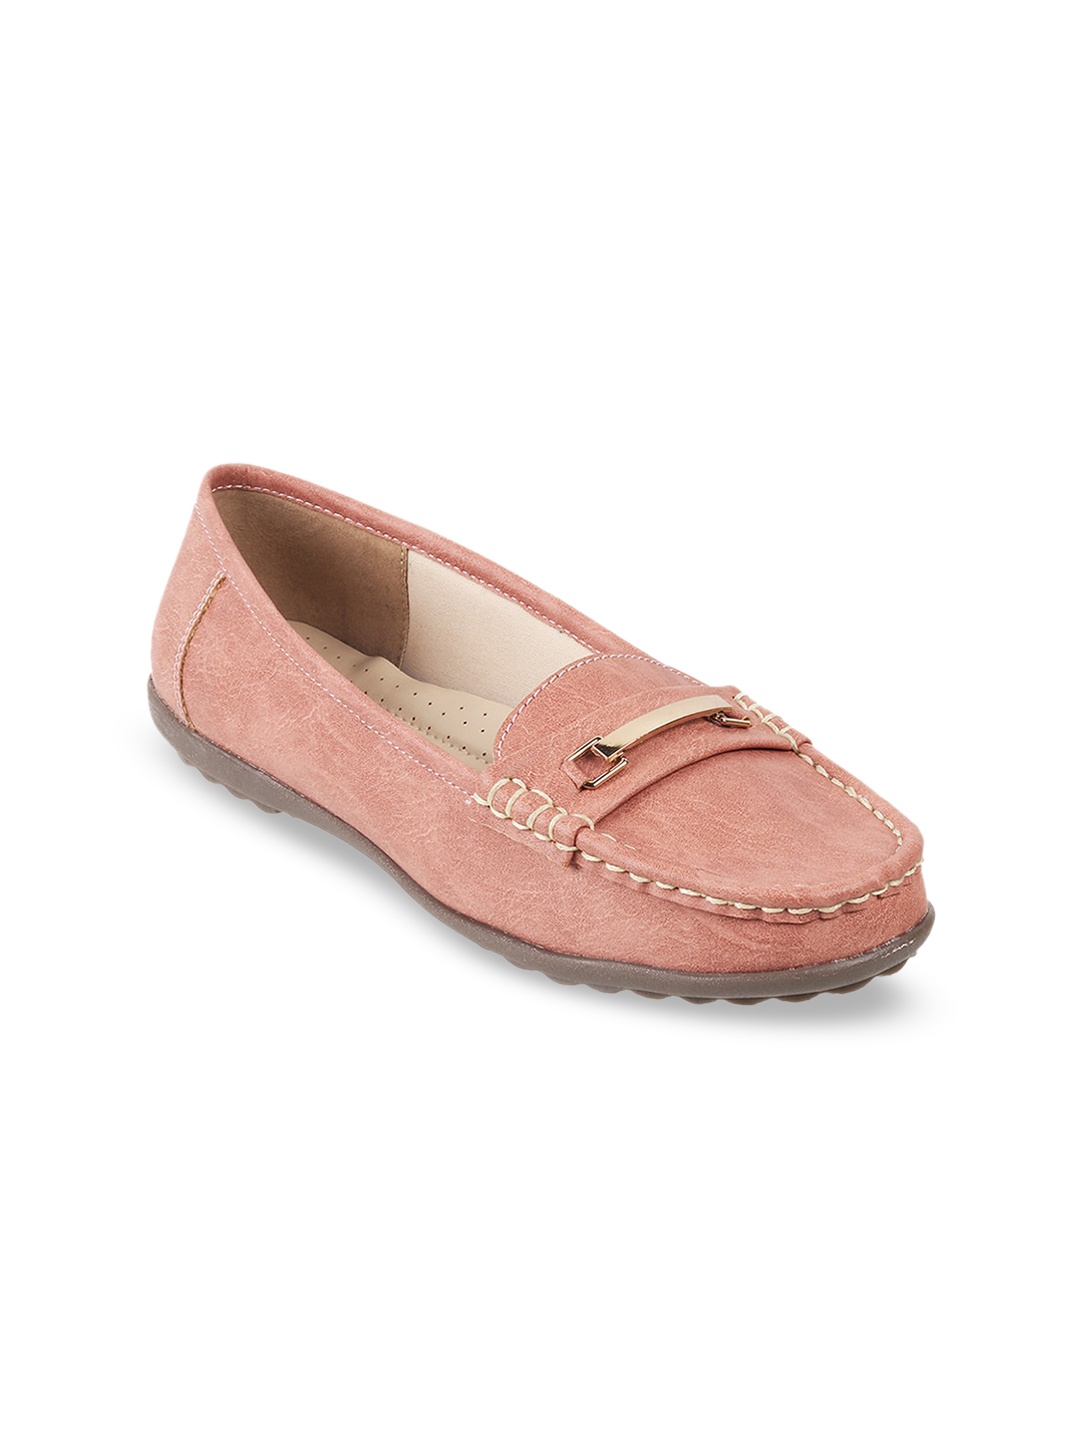 

WALKWAY by Metro Women Textured Round Toe Loafers, Pink